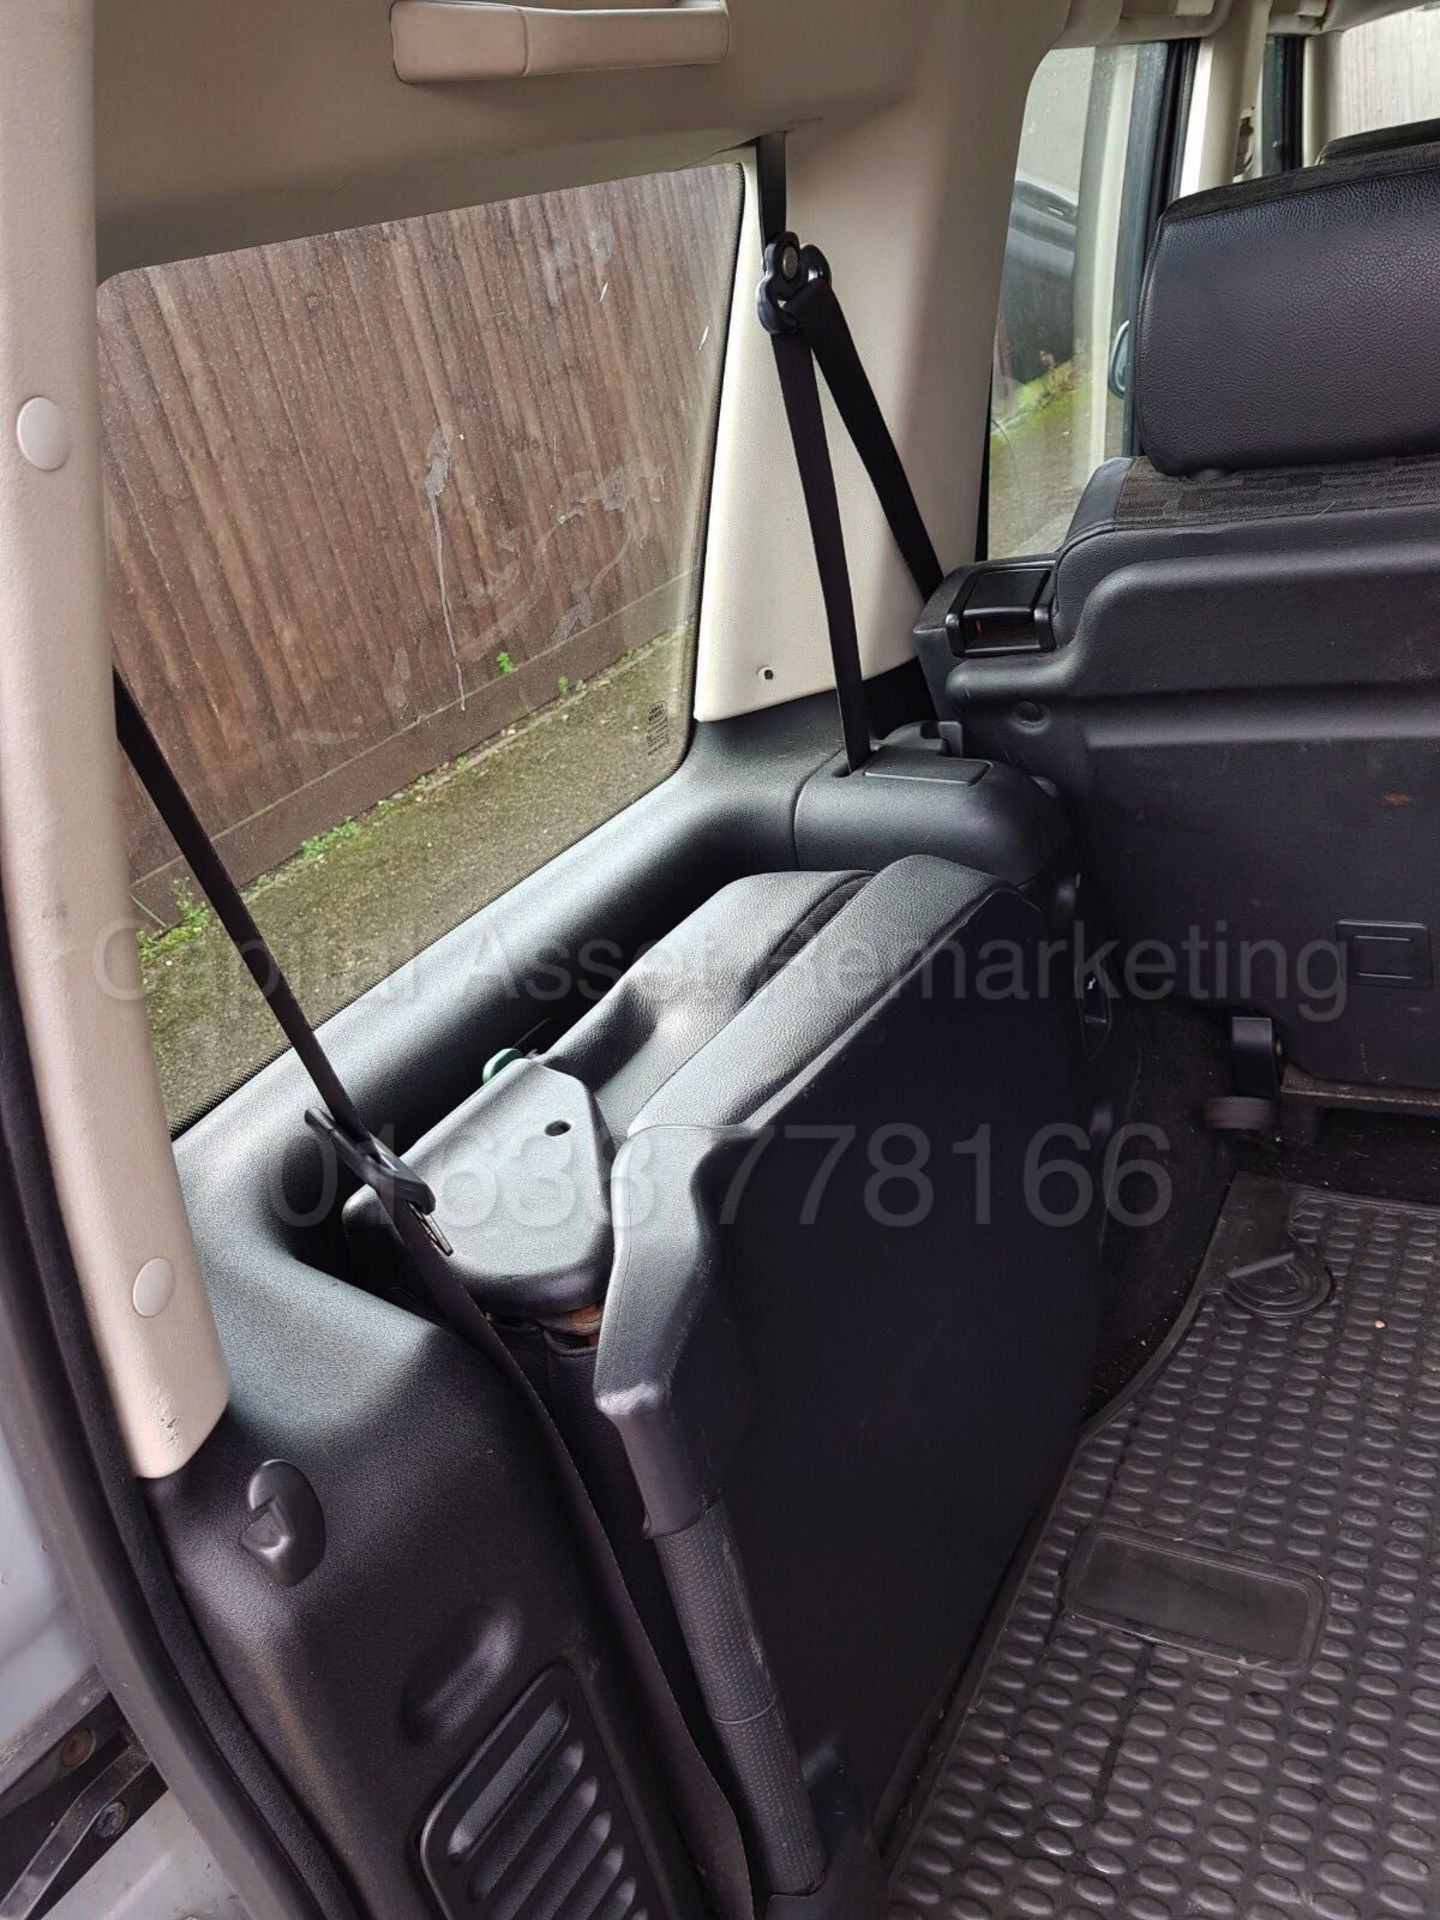 (On Sale) LAND ROVER DISCOVERY 'GS EDITION' (2004 MODEL) 'TD5 - AUTO - 7 SEATER' (NO VAT - SAVE 20%) - Image 15 of 16